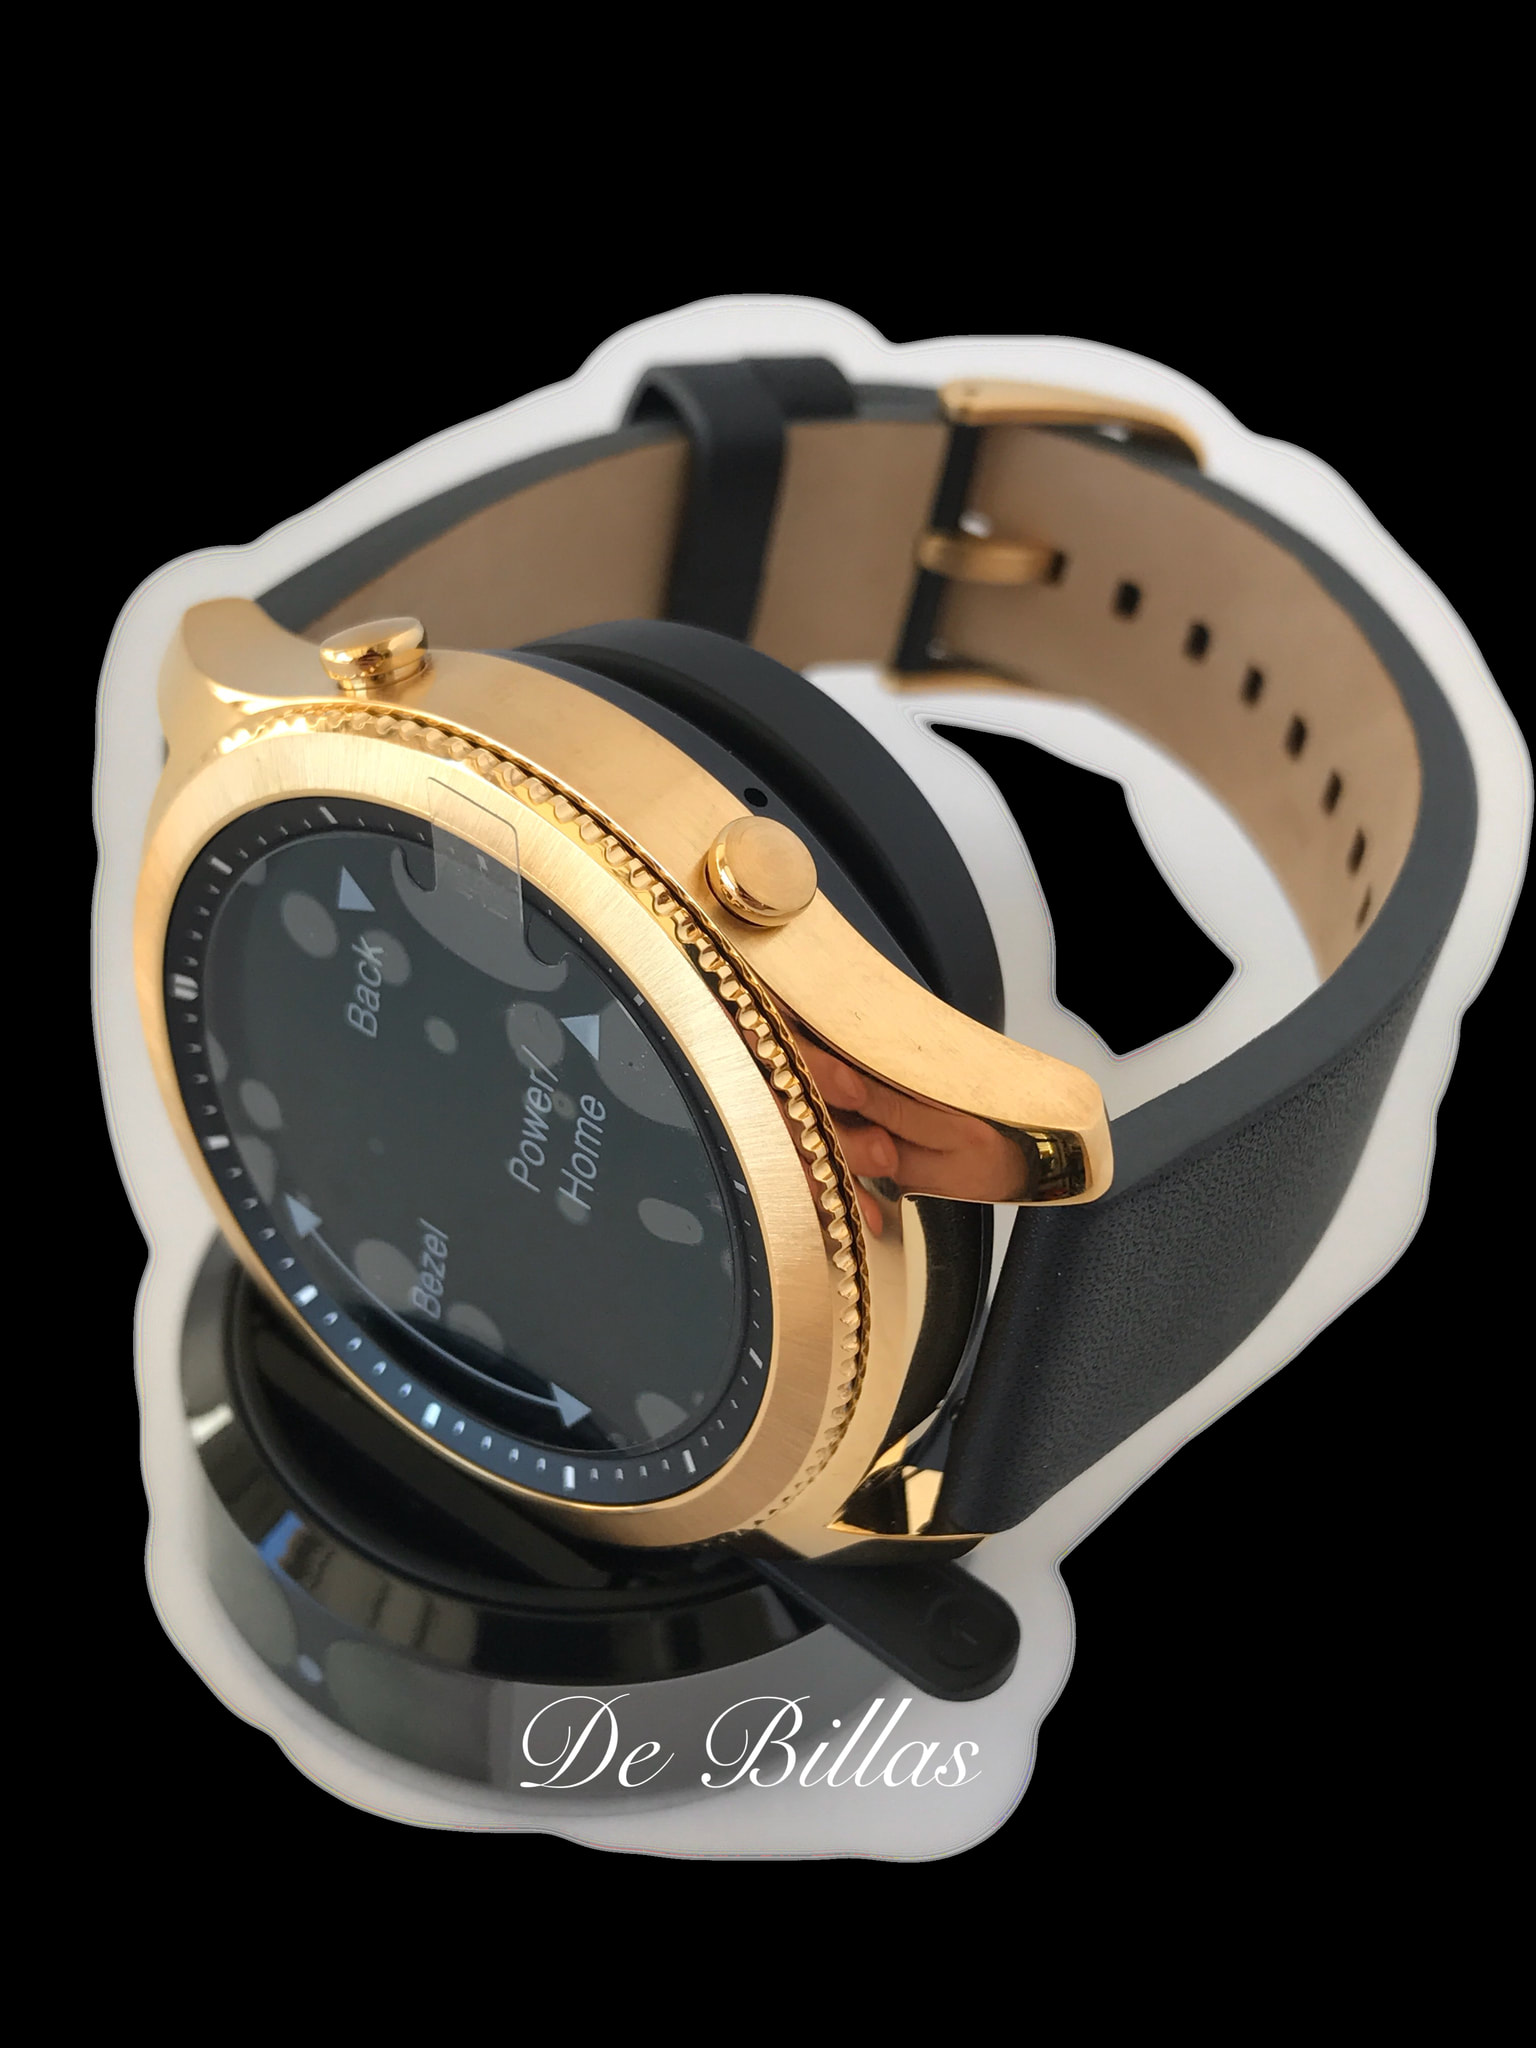 24K Gold Gear S3 Classic Smart Watch Camel Leather